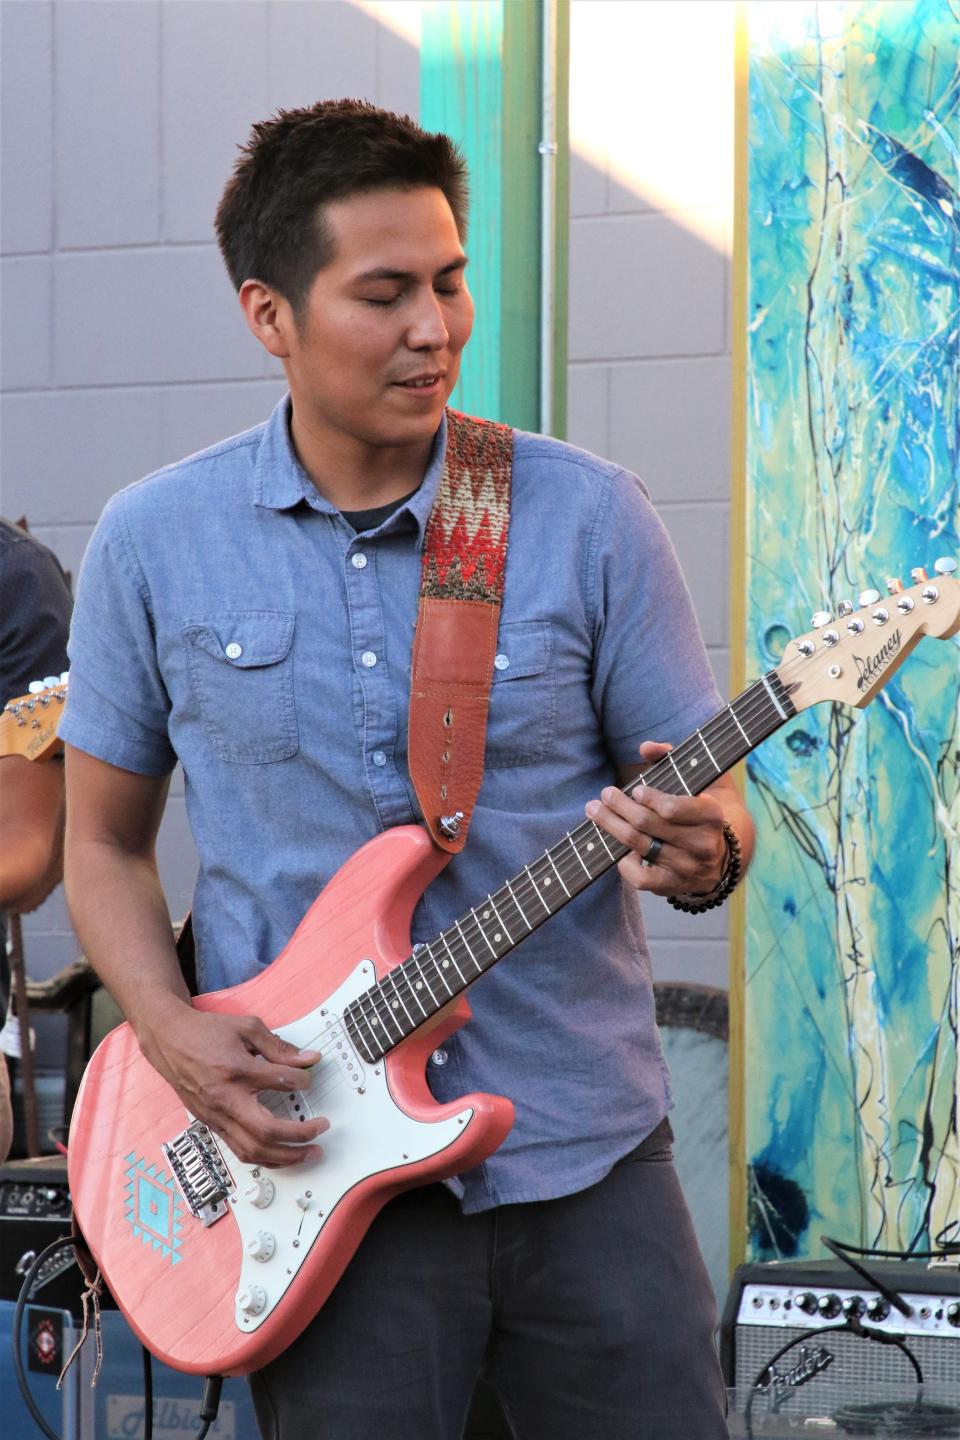 Levi Platero performs this weekend at the Farmington Civic Center as part of a Native music showcase.